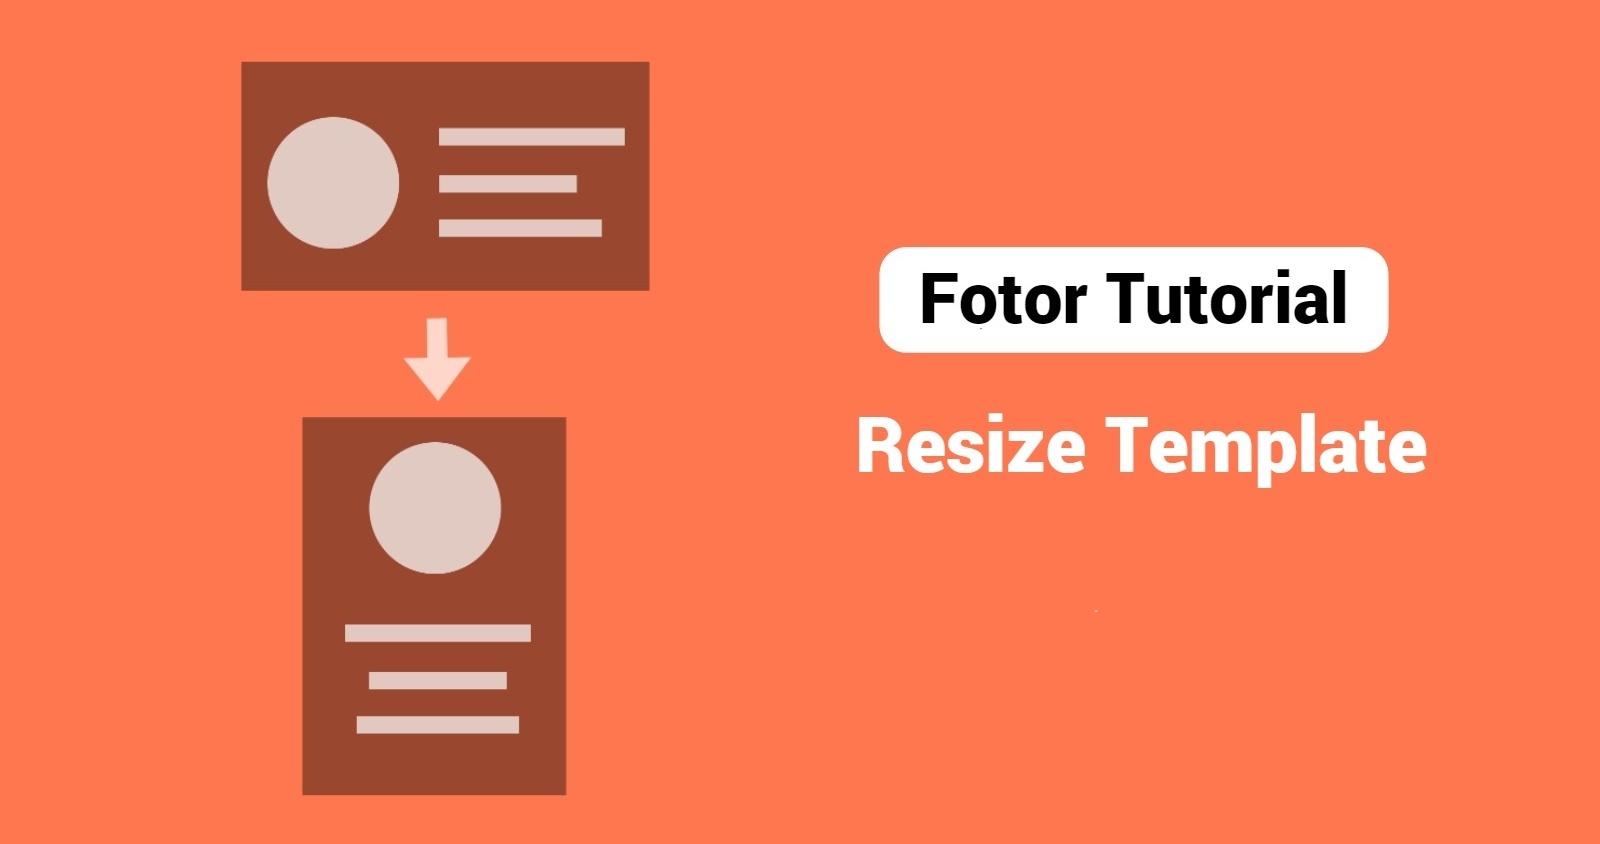 Video Tutorial: Graphic Design & Photo Editing Tips for You | Fotor